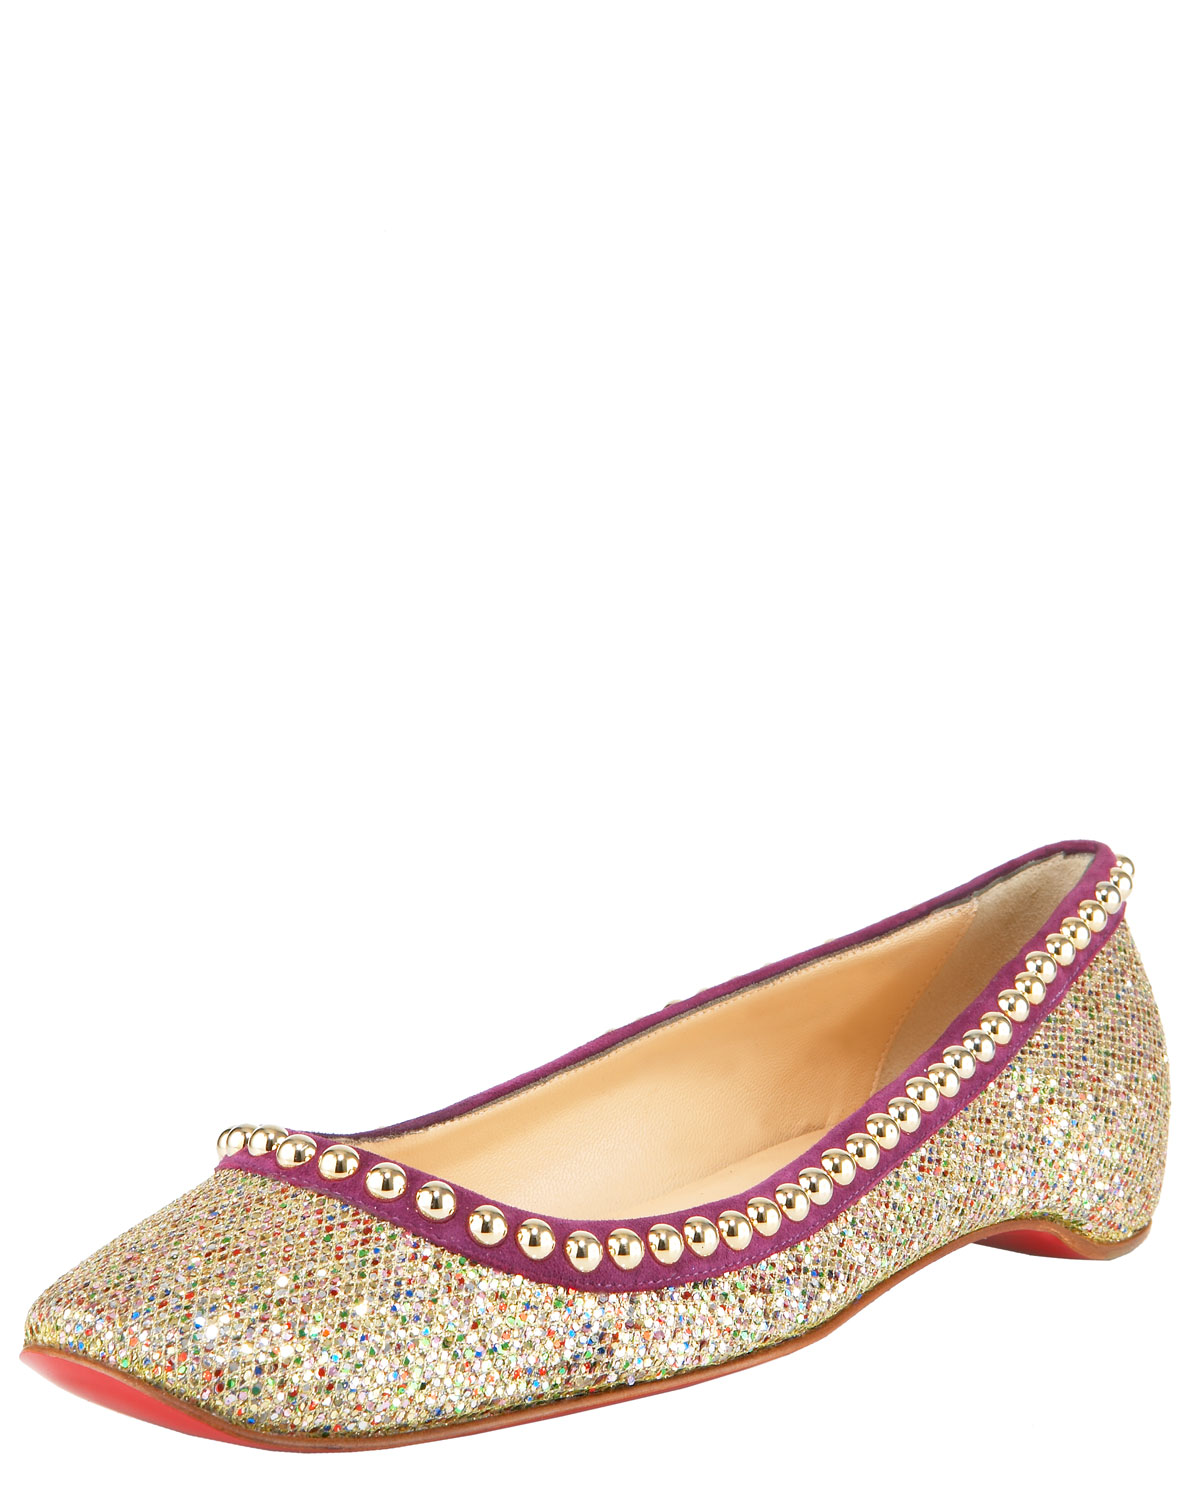 red and gold spiked louboutins - Artesur ? christian louboutin flats Metallic suede scalloped trim